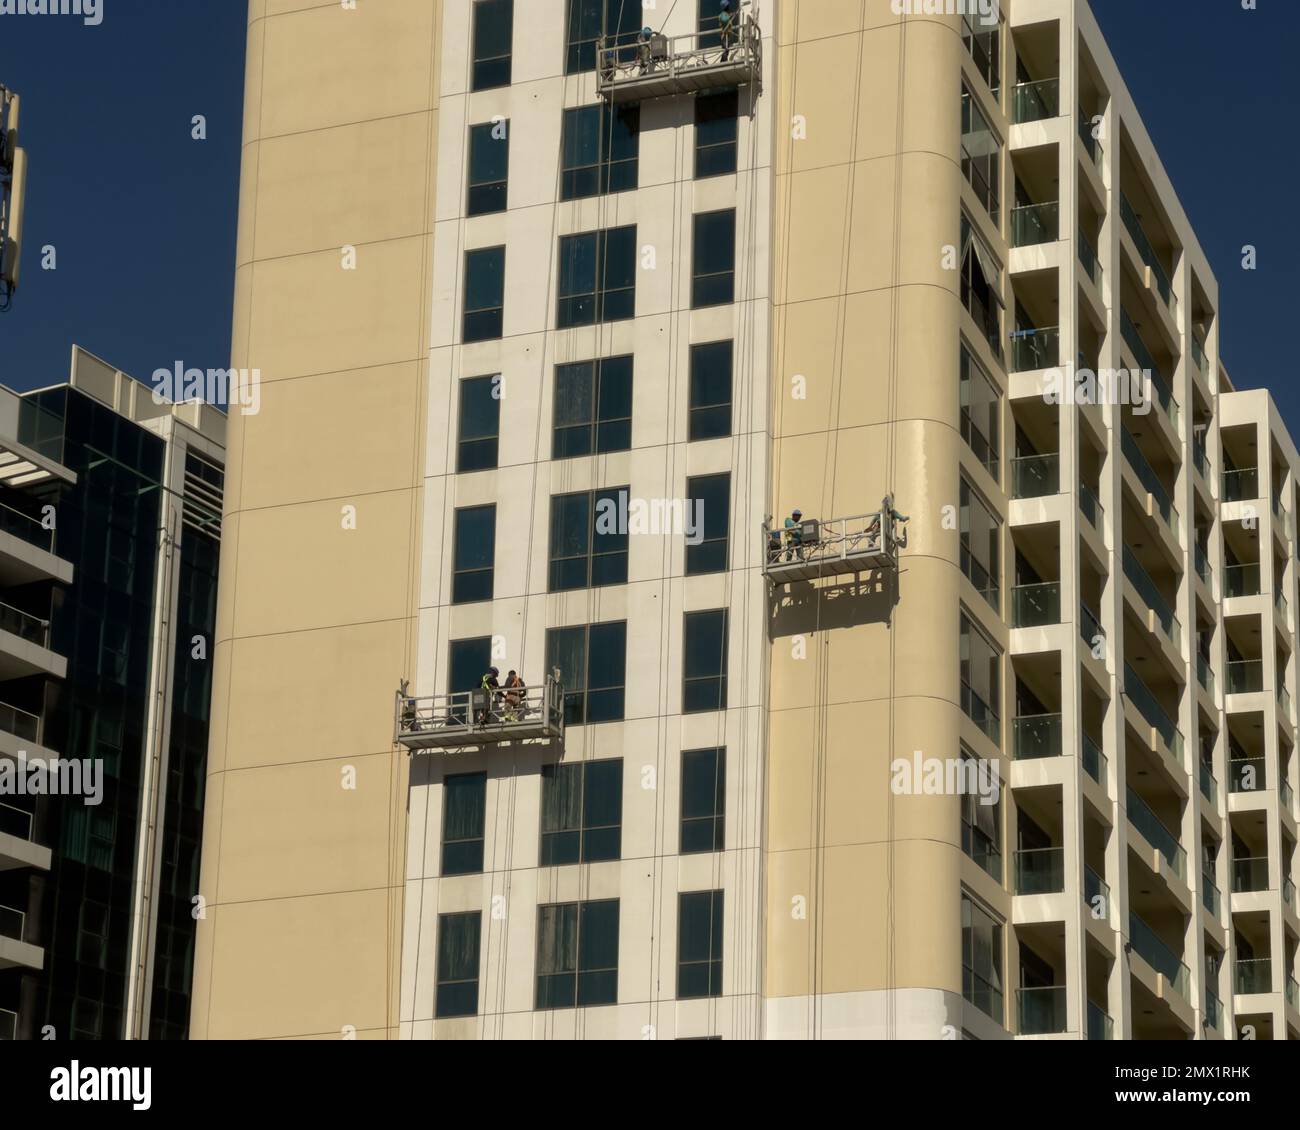 Dubai, United Arab Emirates - 7th January, 2022: Construction workers painting the exterior facade of a residential building, lowered on suspended sca Stock Photo